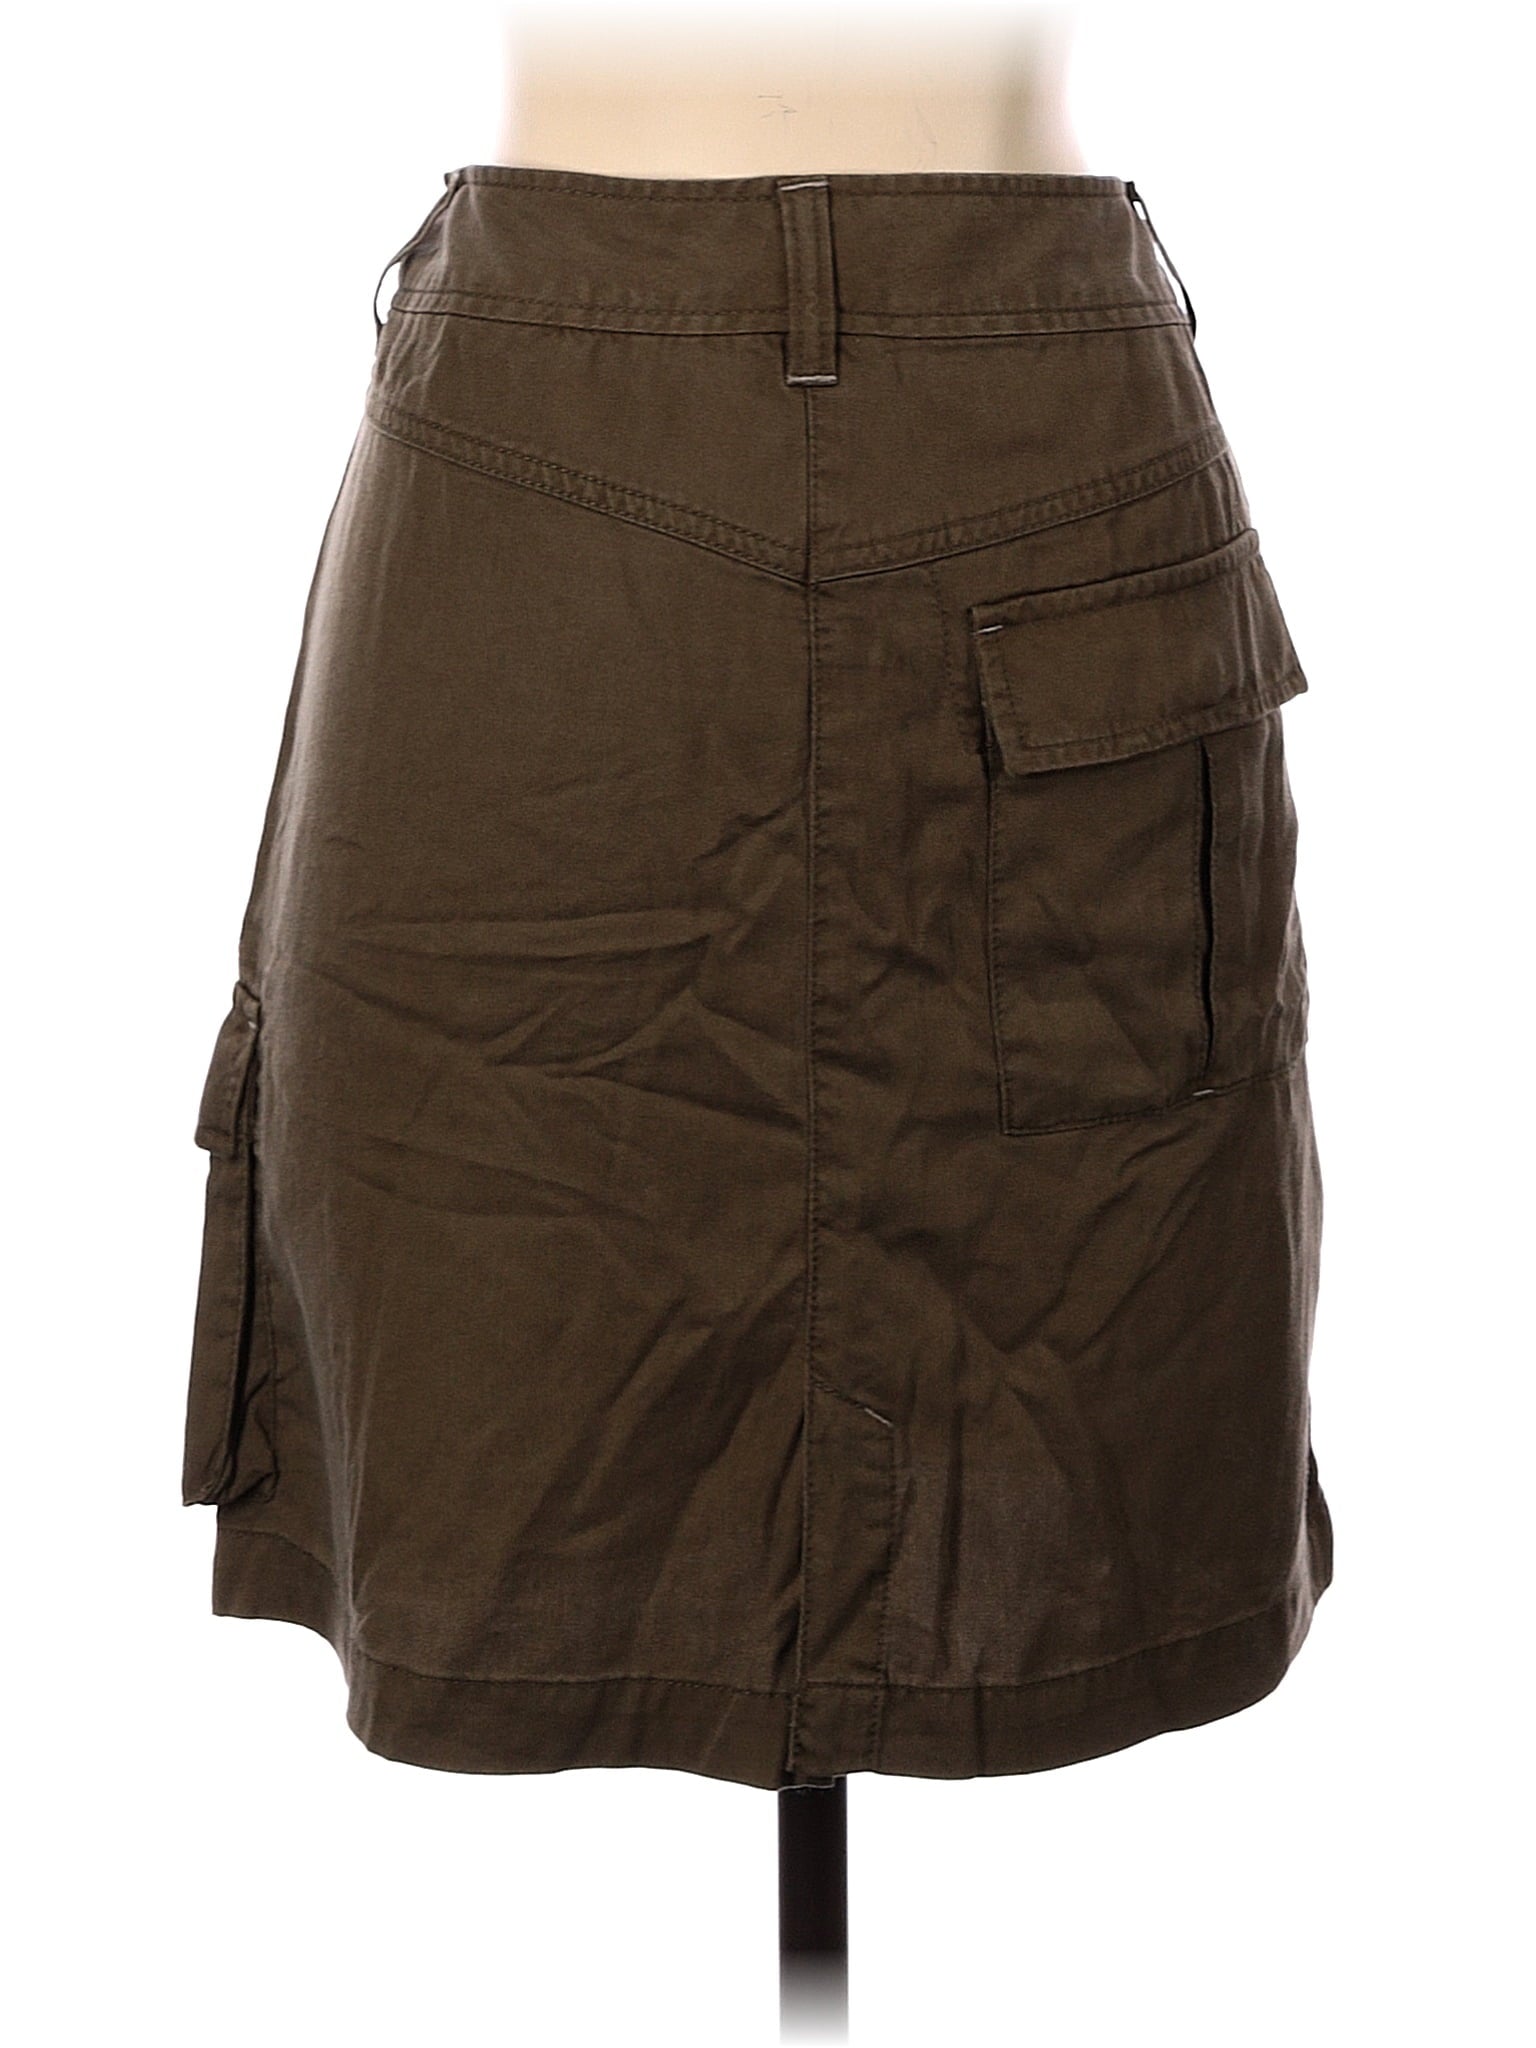 Active Skirt size - 4